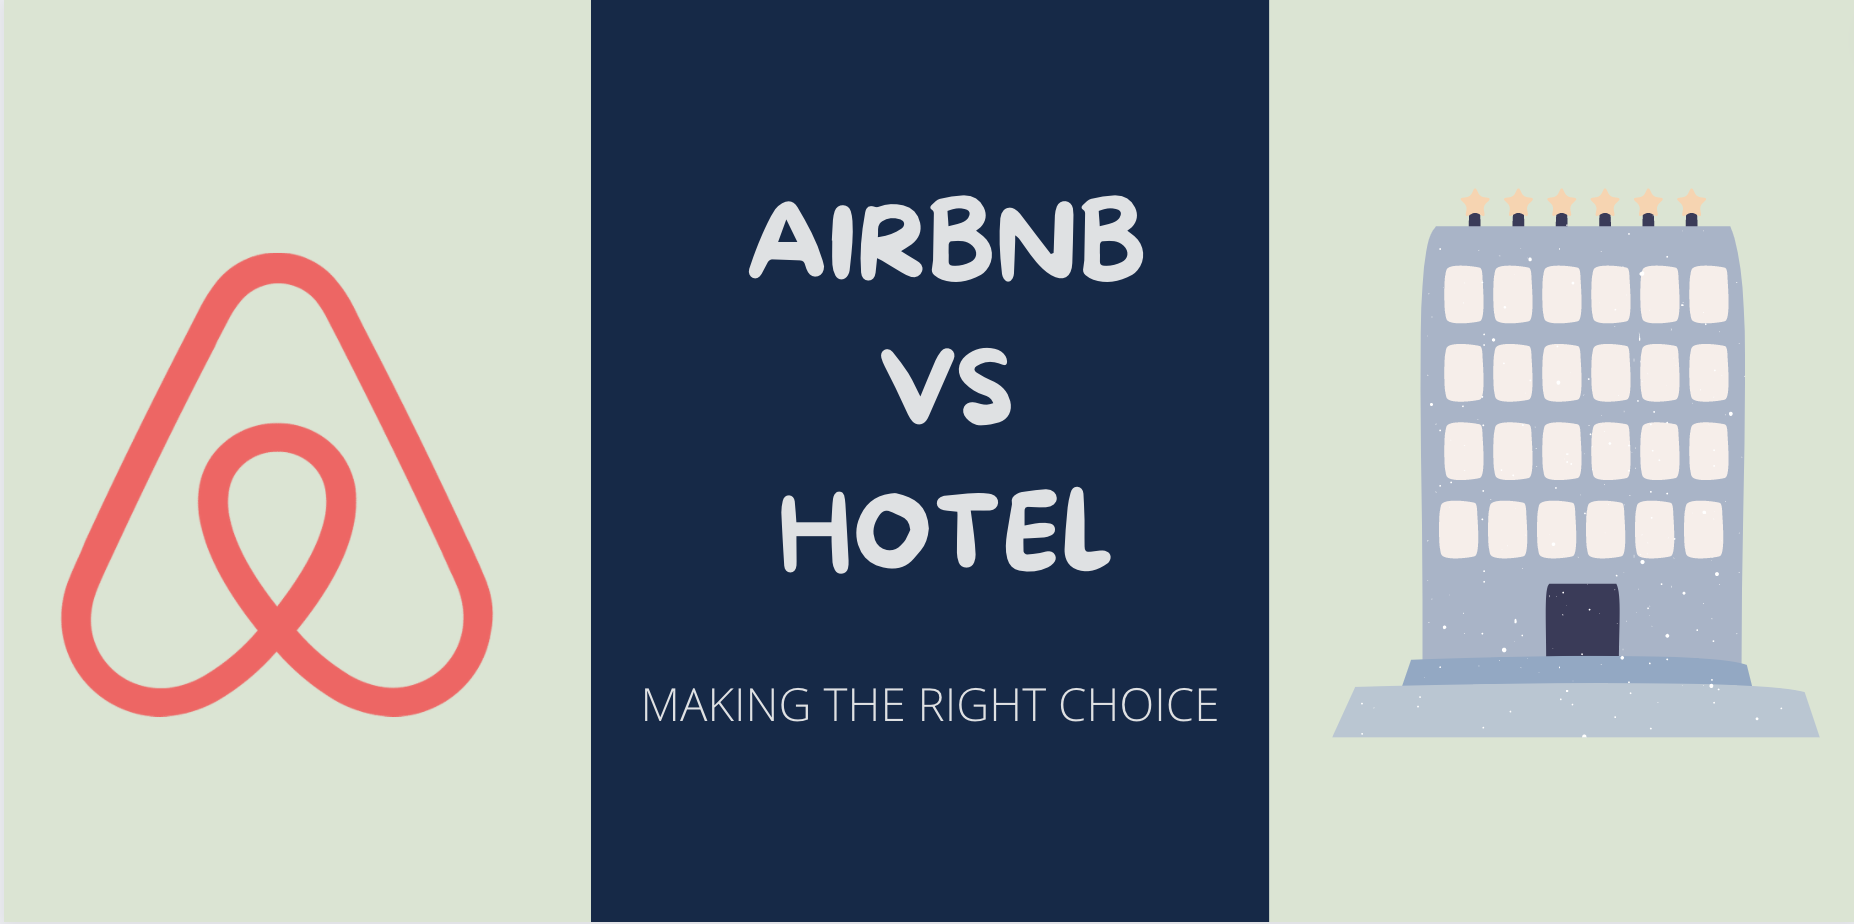 Where to stay: Airbnb VS Hotel